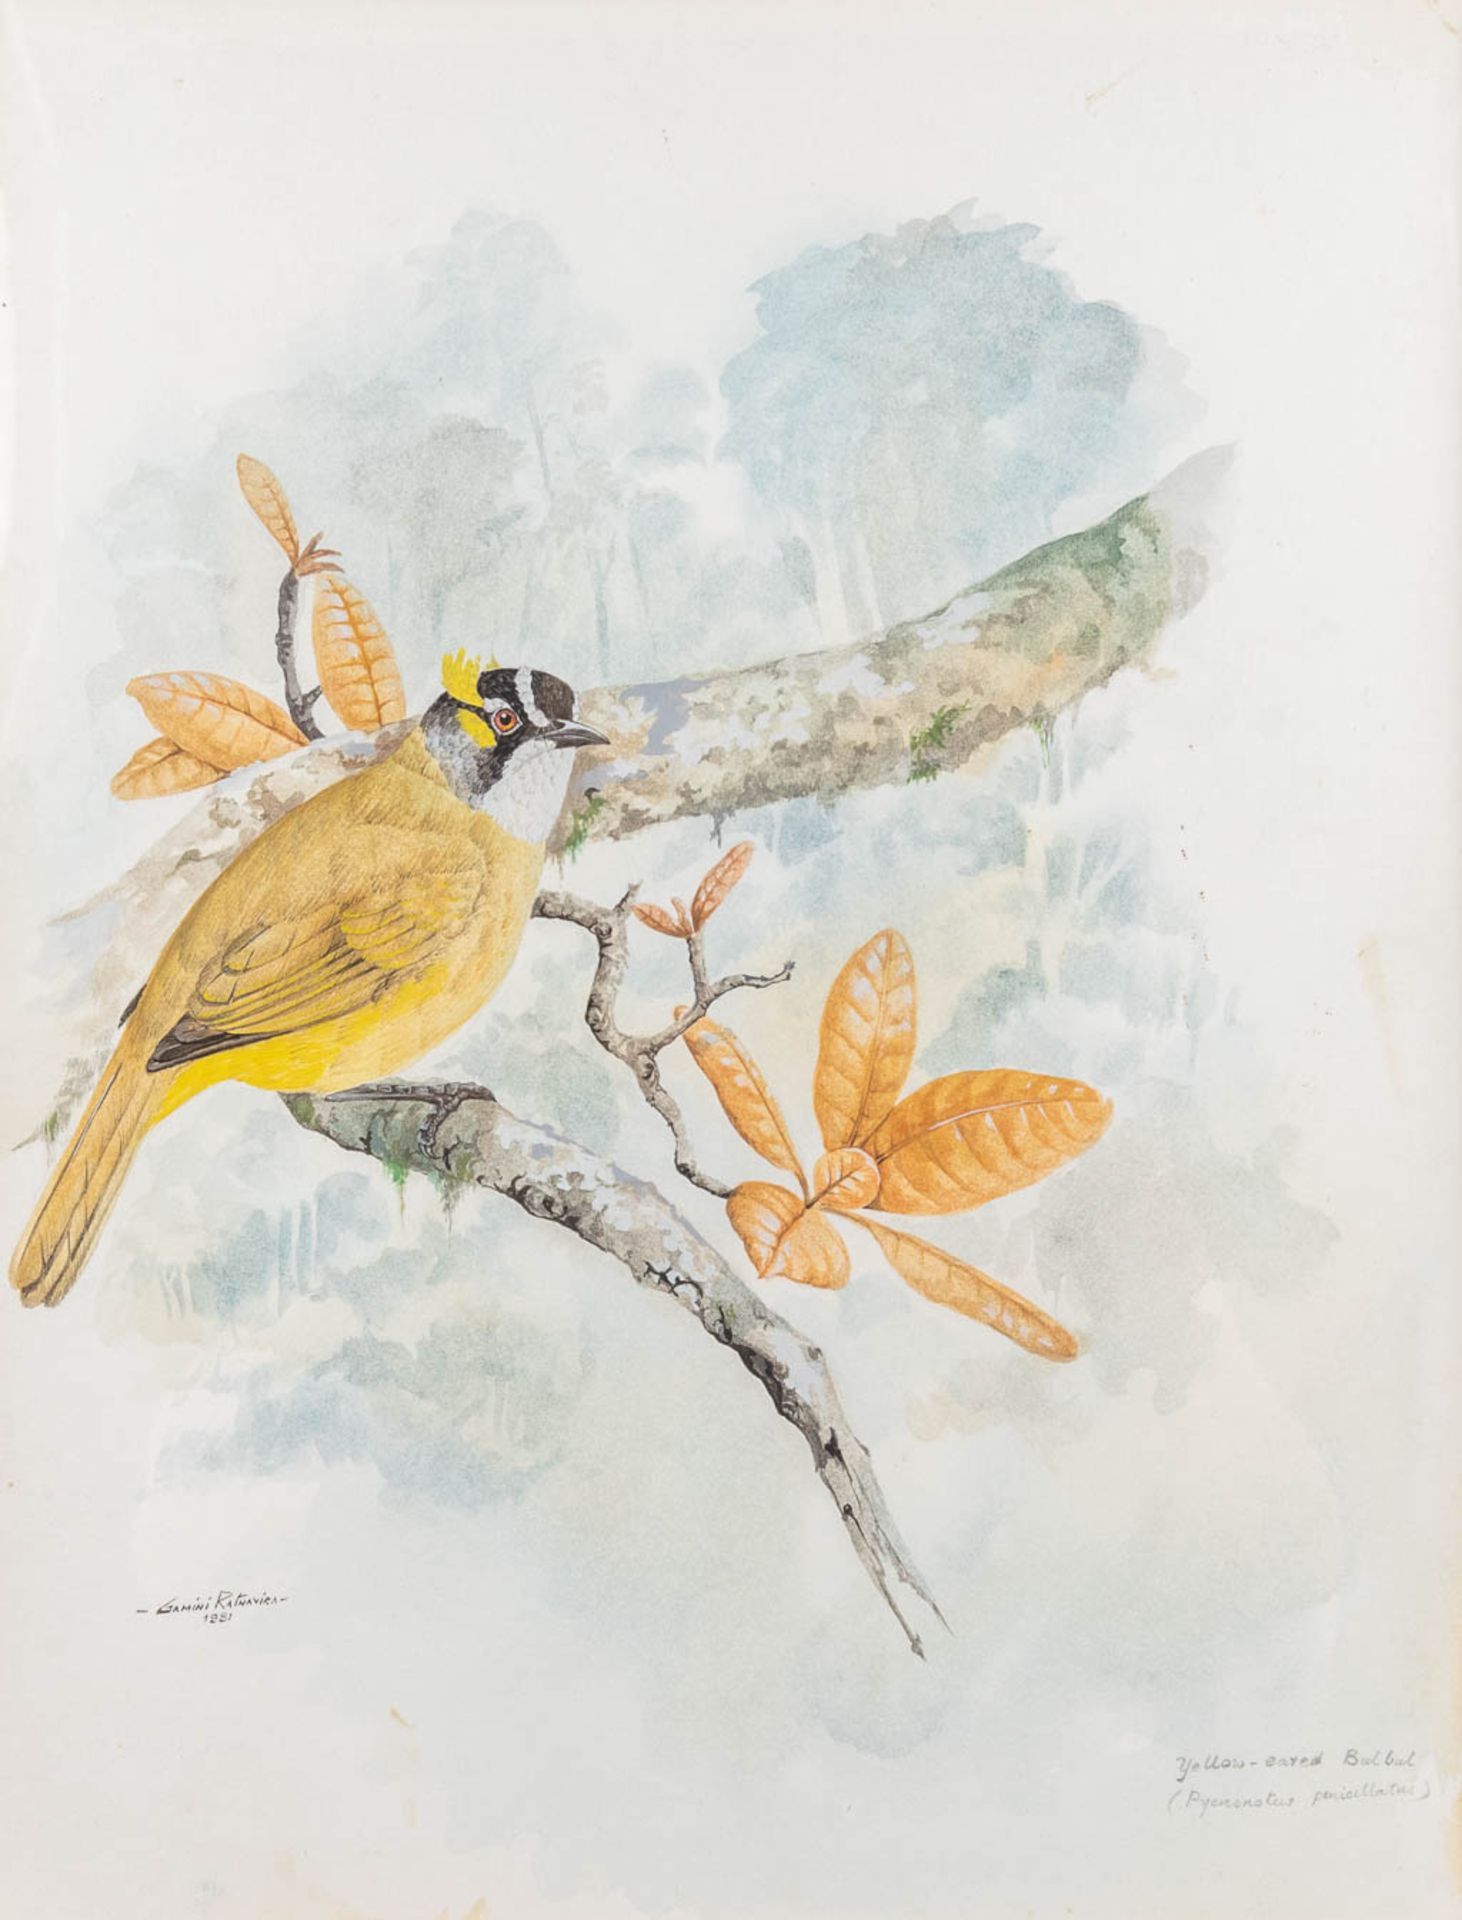 Gamini P. RATNAVIRA (1949) a collection of 4 drawings, watercolour on paper. (W: 26 x H: 34 cm) - Image 11 of 24